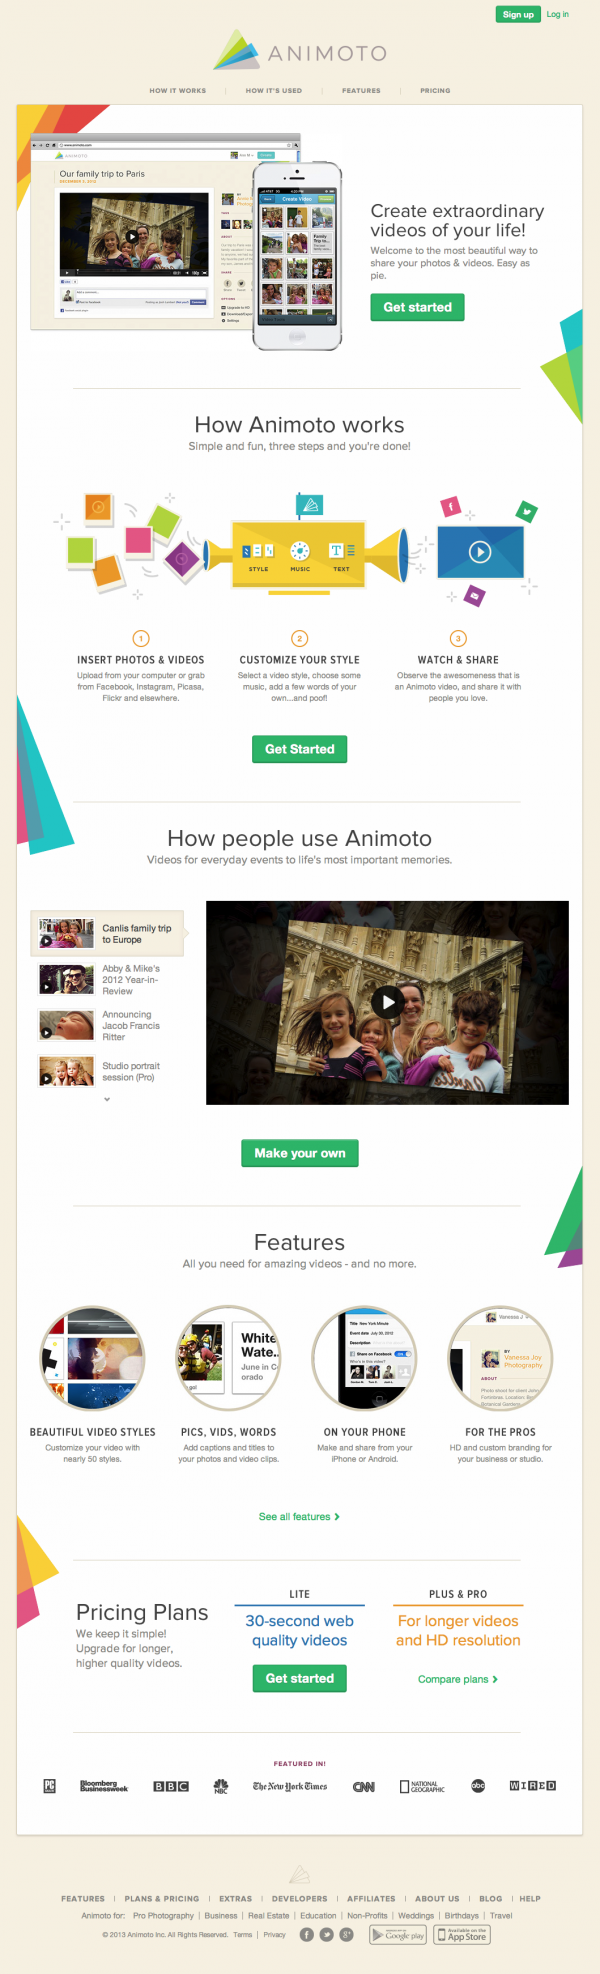 Animoto - Make and Share Beautiful Videos Online